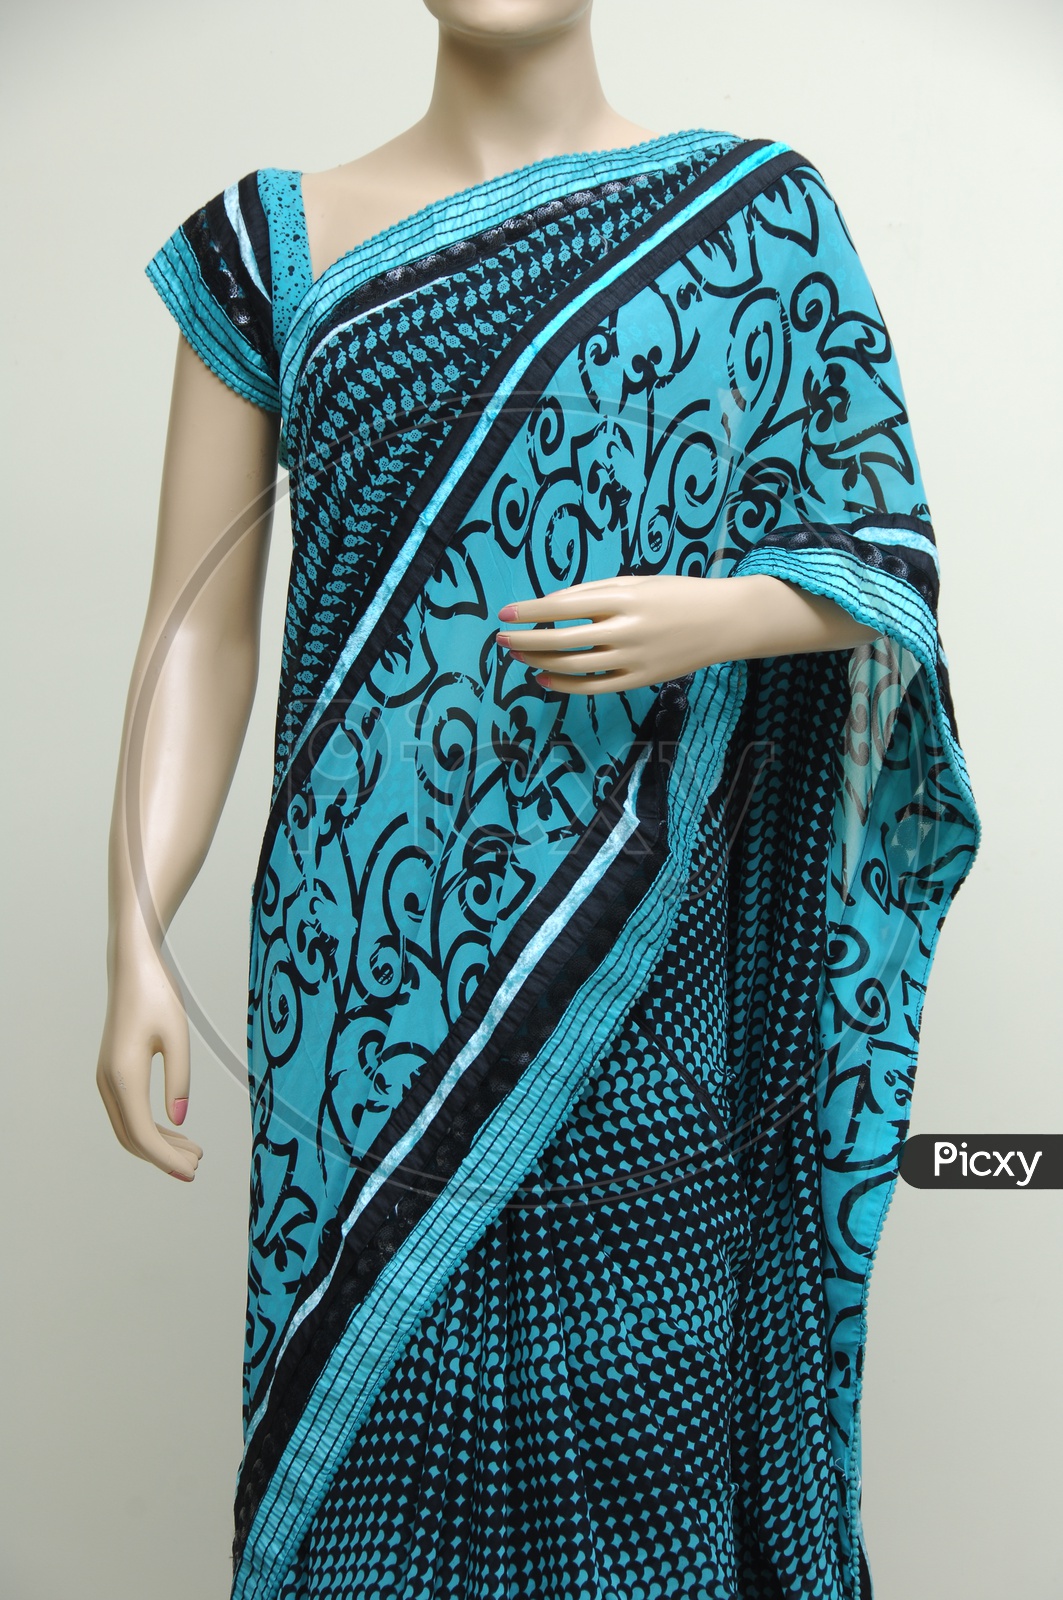 Mannequin draped in a traditional Indian saree